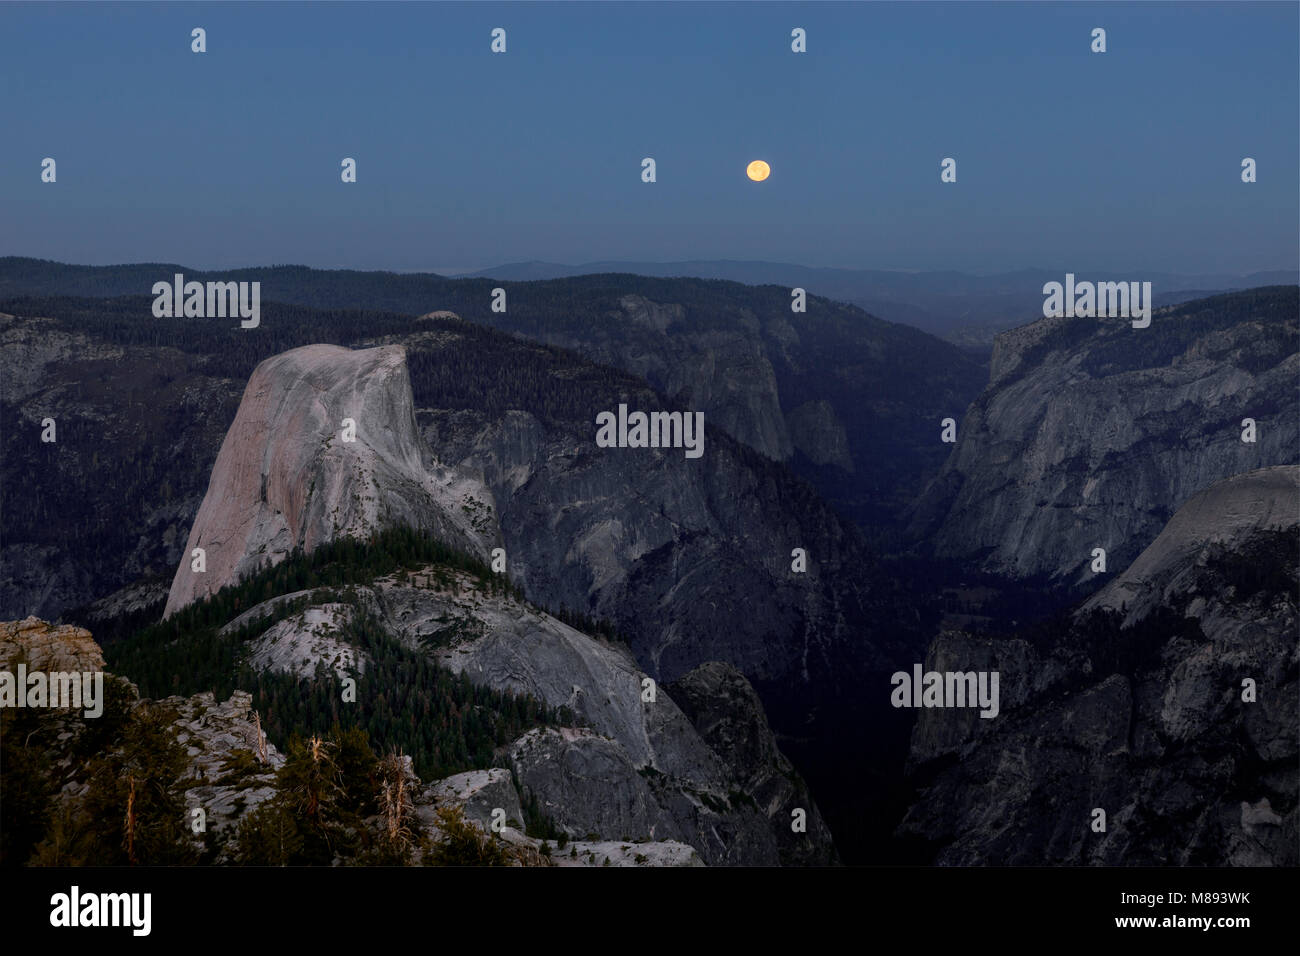 CA02874-00...CALIFORNIA - Moon setting as the sun rises with a view of Half Dome and Yosemite Valley from Clouds Rest in Yosemite National Park. Stock Photo